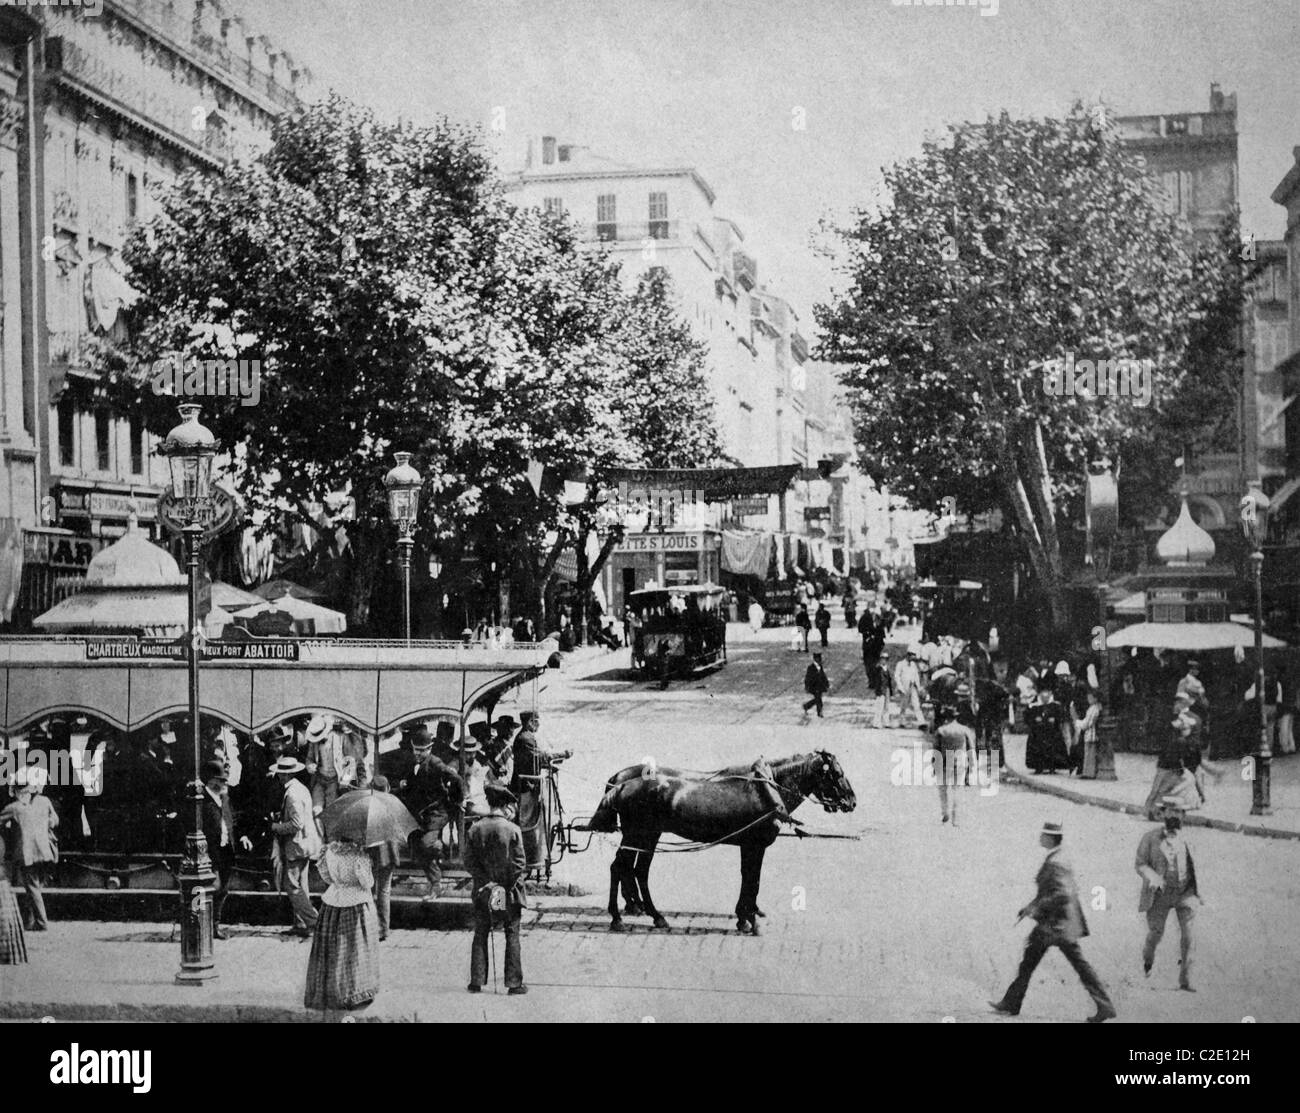 One of the first autotypes of the Cours Saint-Louis, Marseille, historical photograph, 1884 Stock Photo